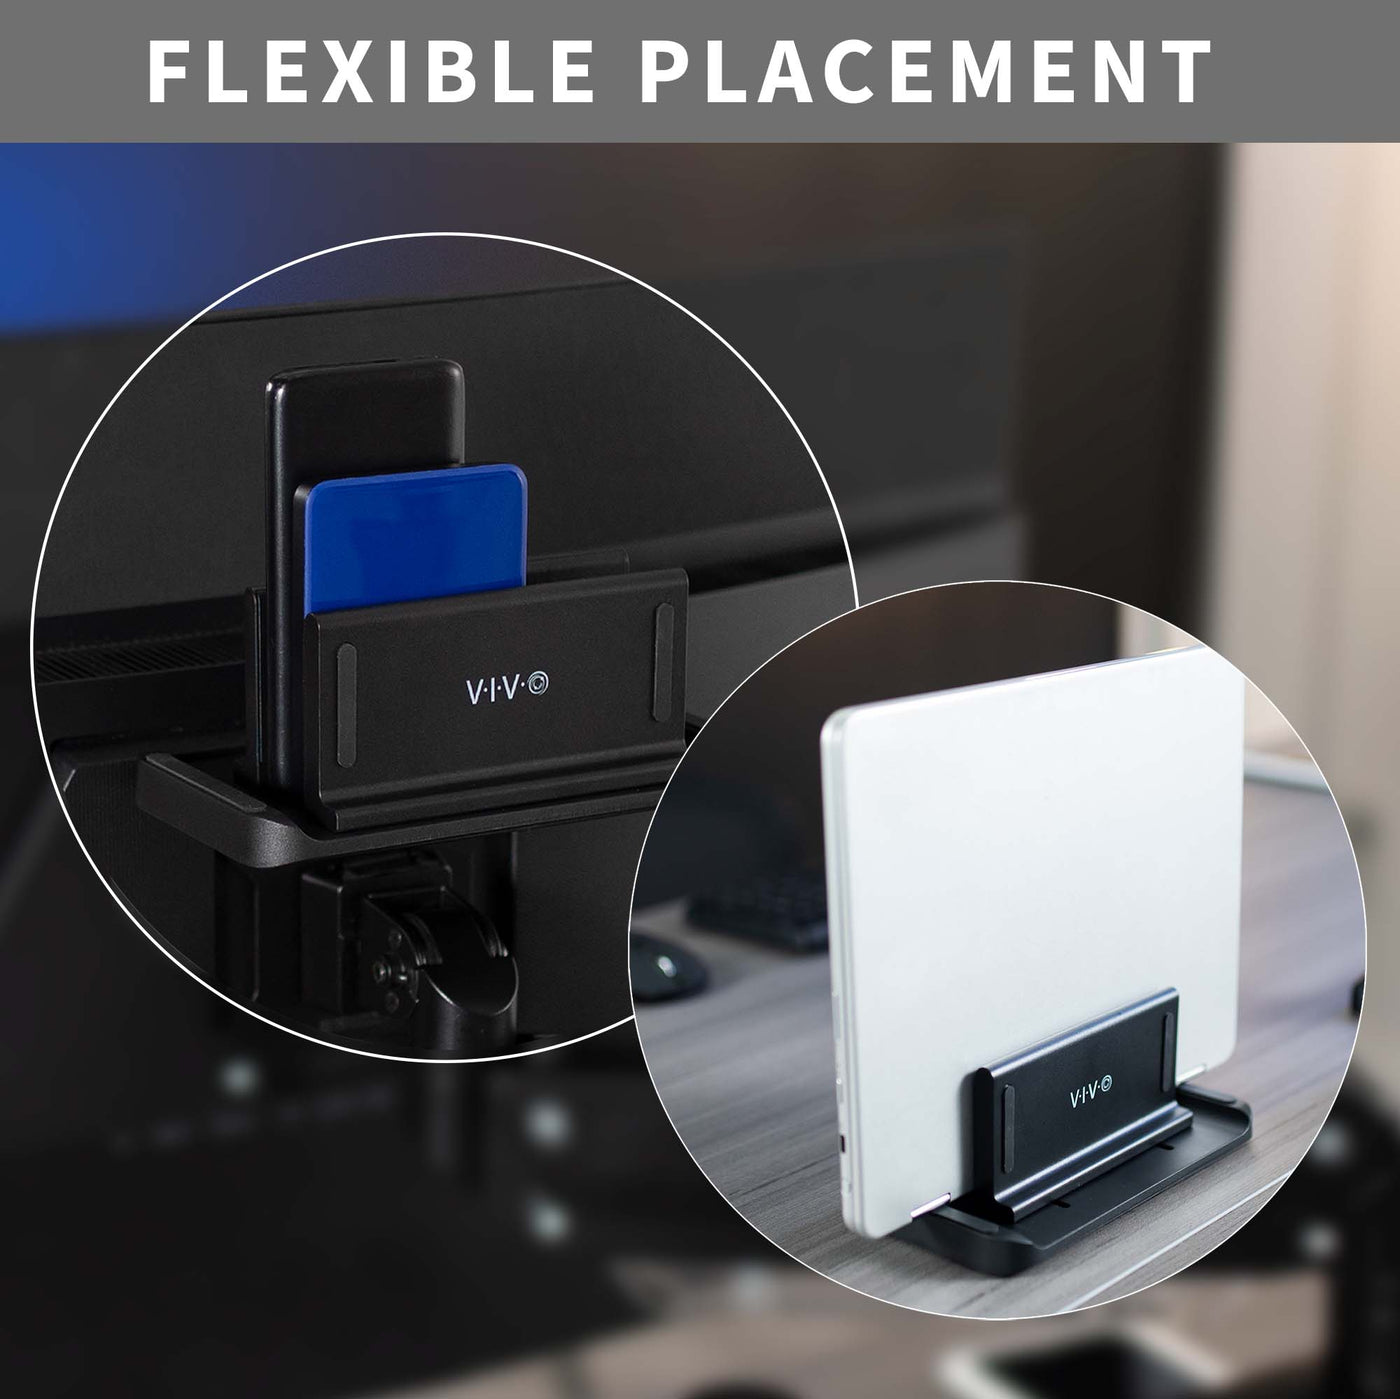 Multifunctional Thin Client Mini PC Mount – VIVO - desk solutions, mounting, and more